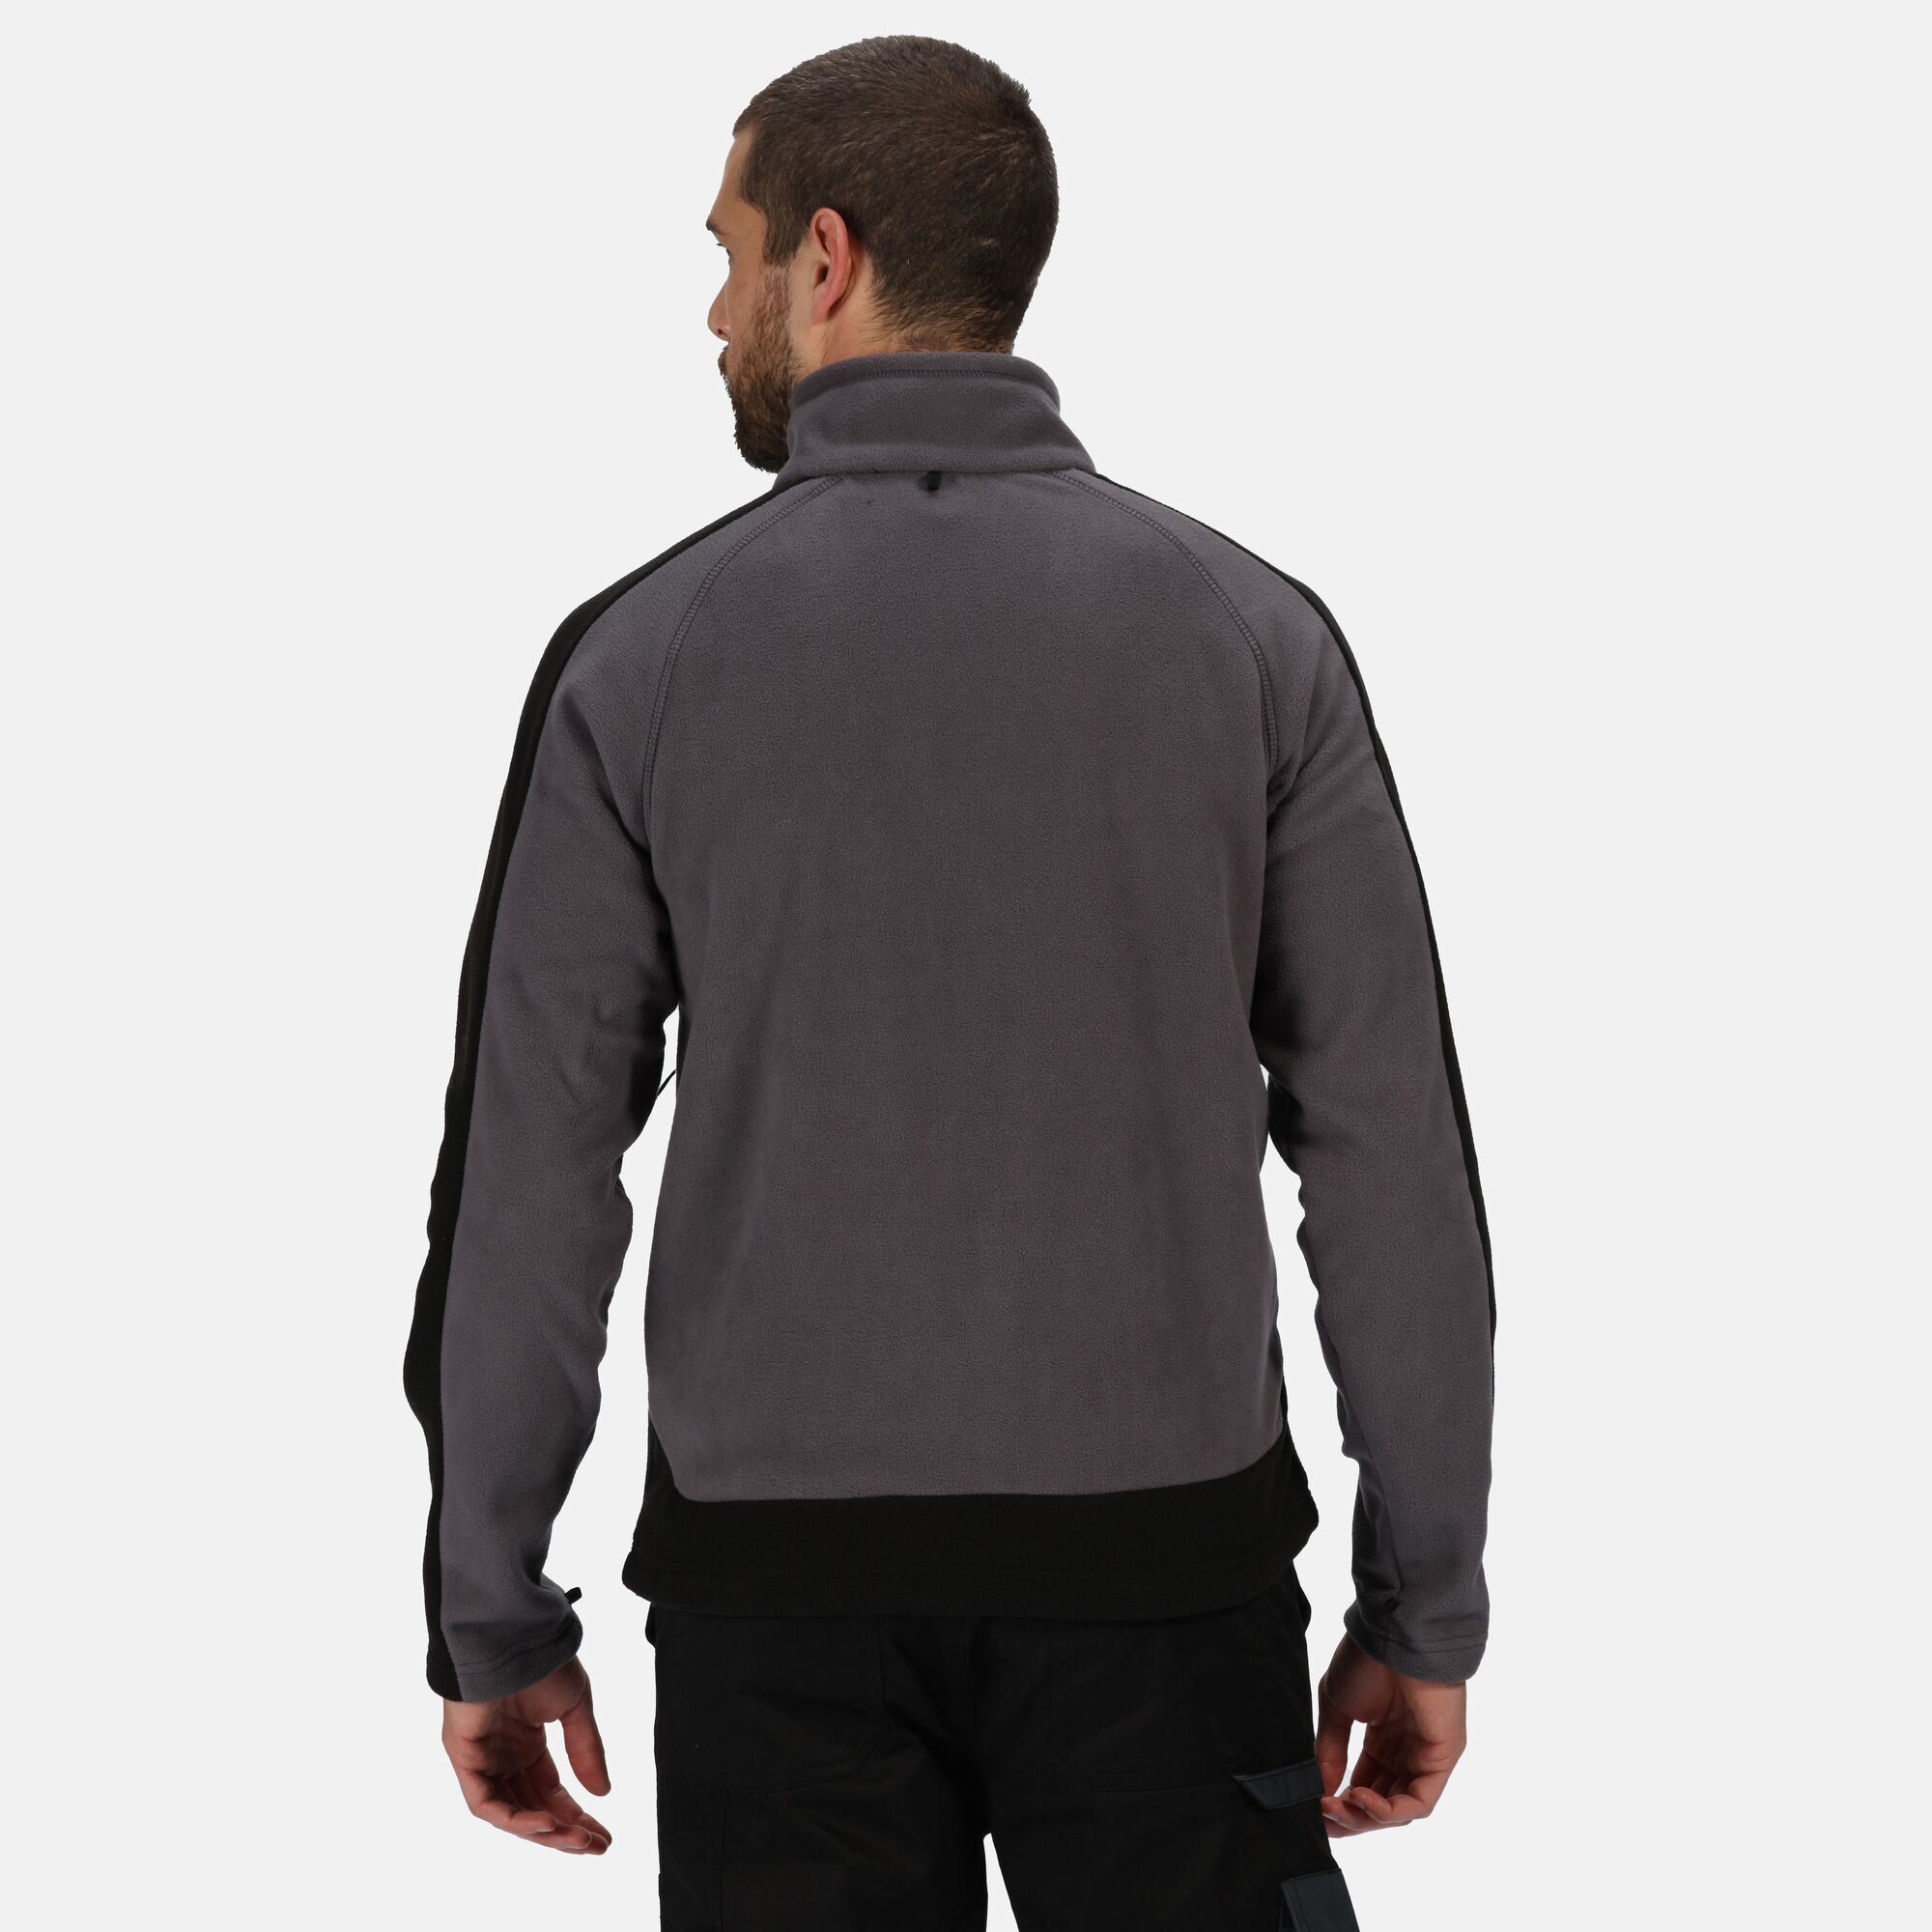 100% Polyester. Anti-pill fleece. Adjustable shockcord hem. Inner zip & chin guard. 1 zipped chest pocket, 2 zipped lower pockets. Interactive attachment loops at cuffs.